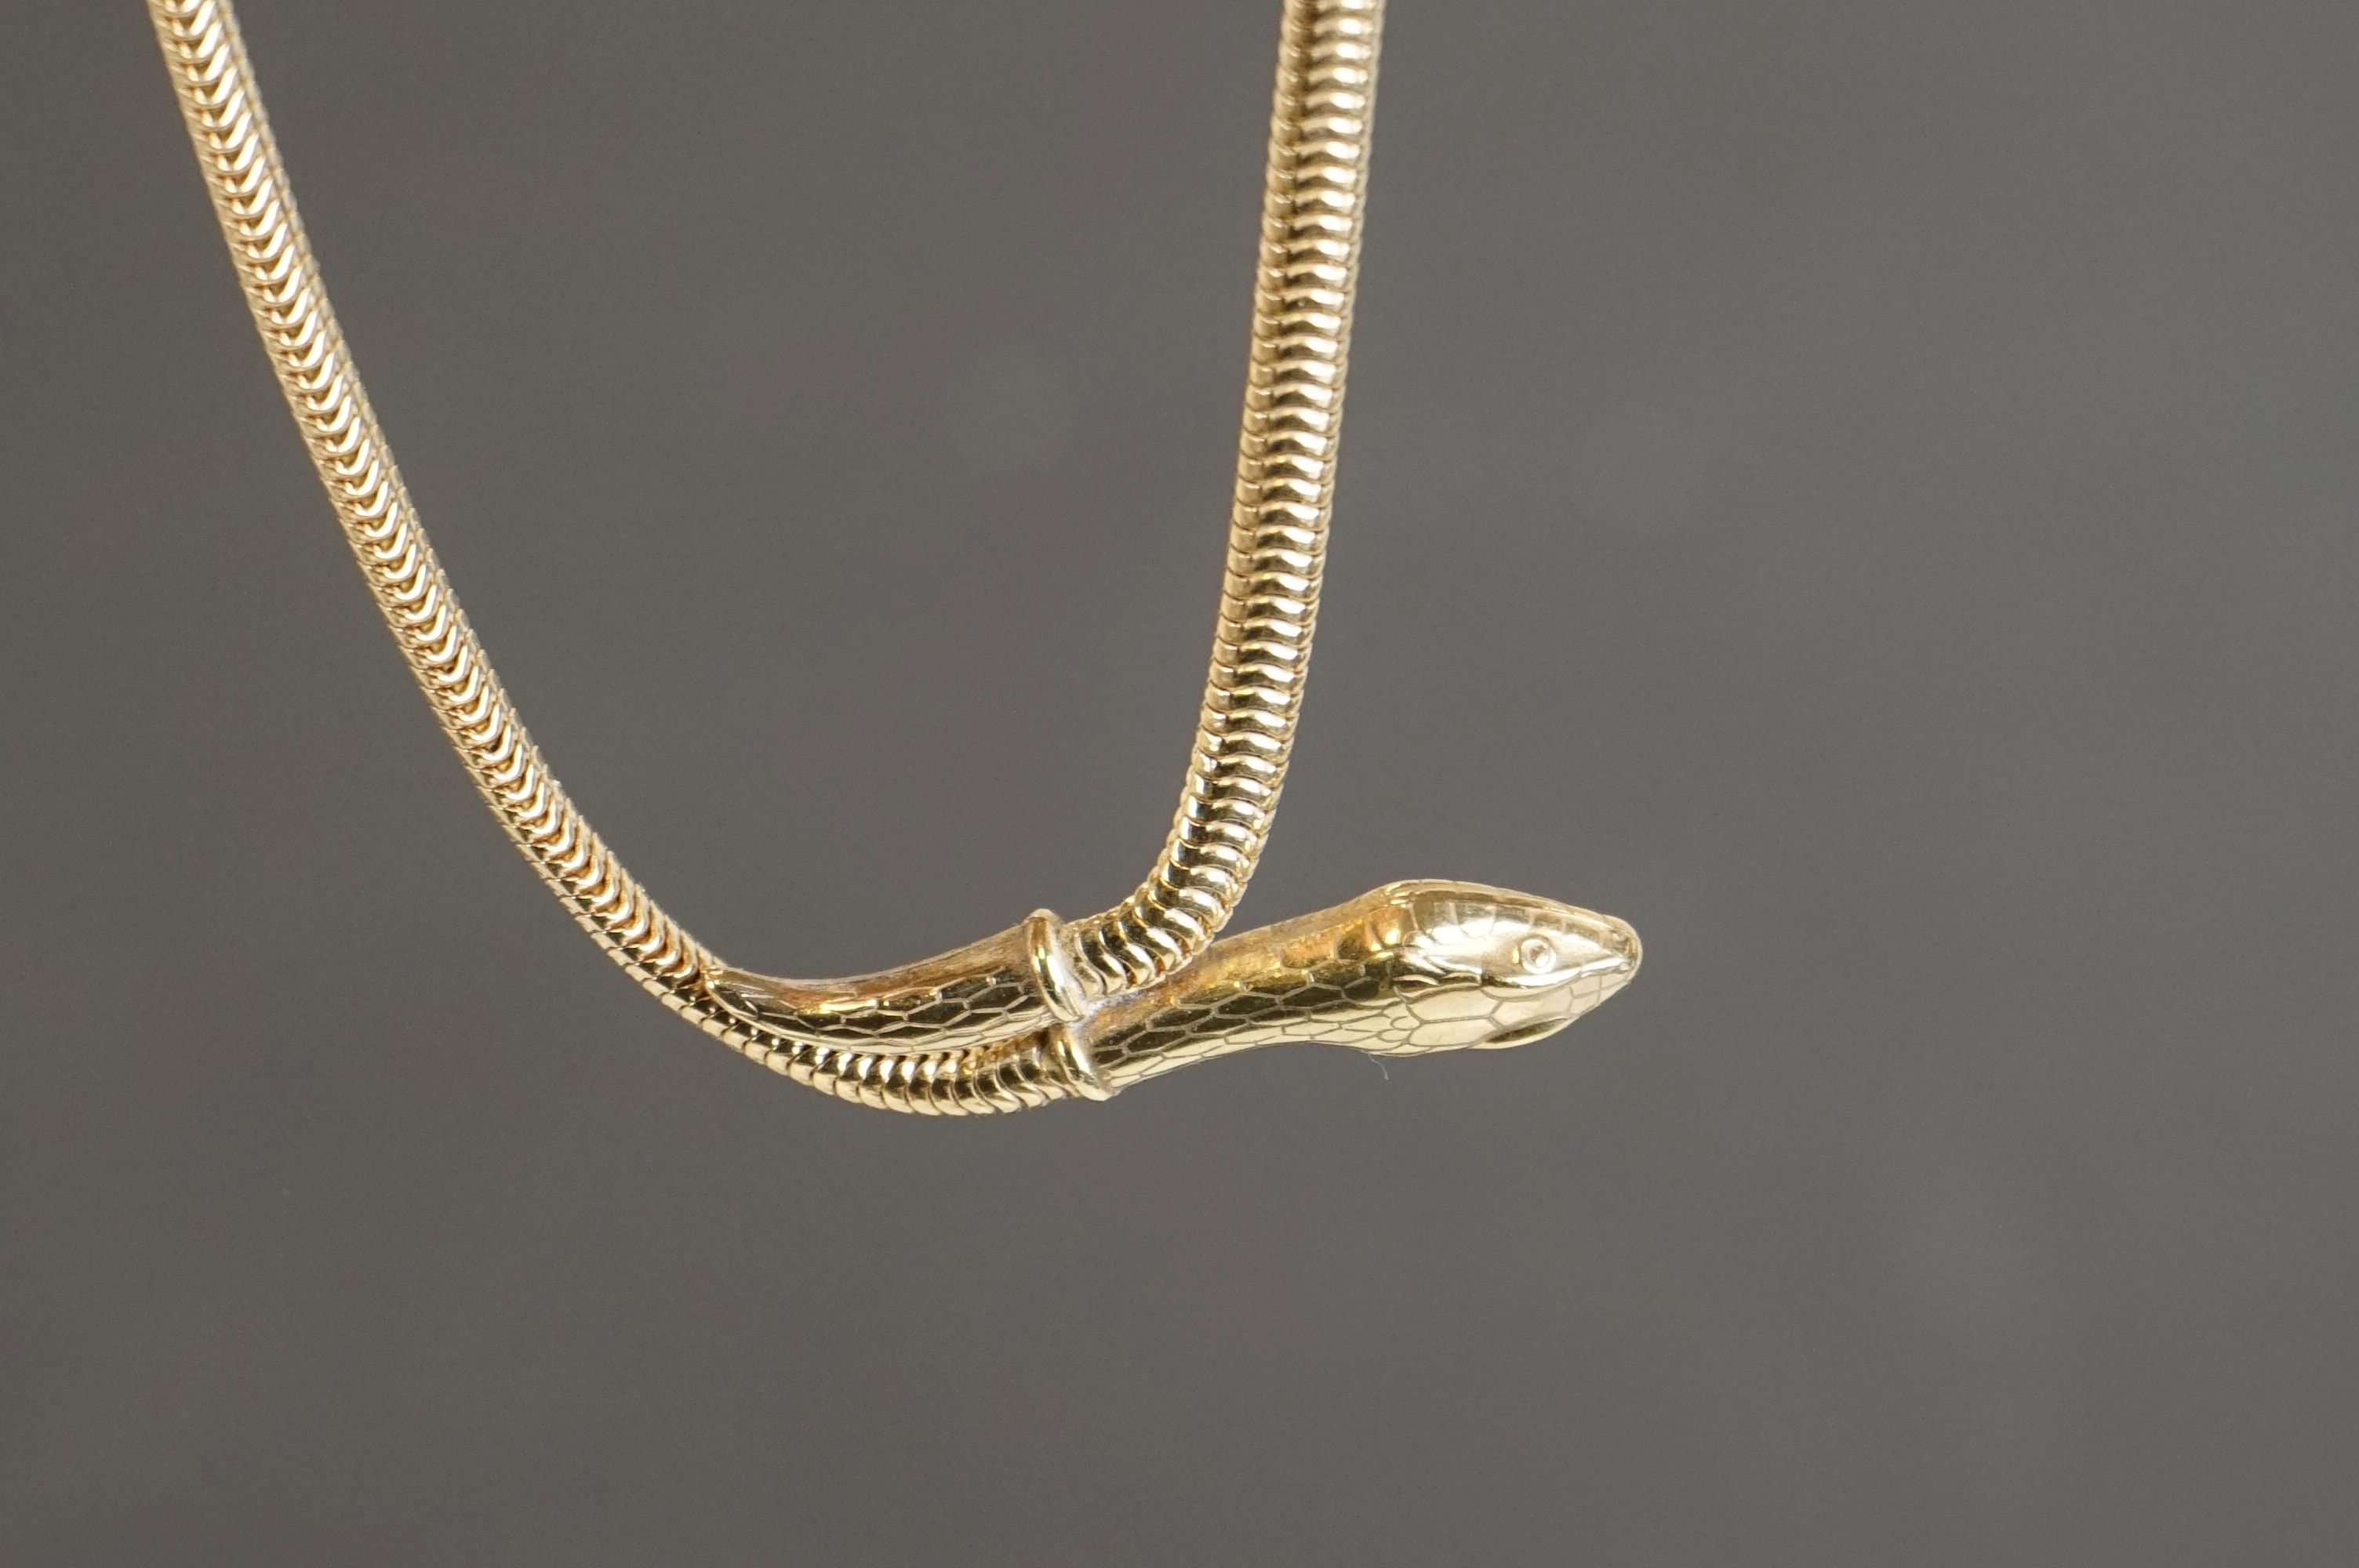 A yellow metal necklace in the form of a snake. - Image 2 of 6